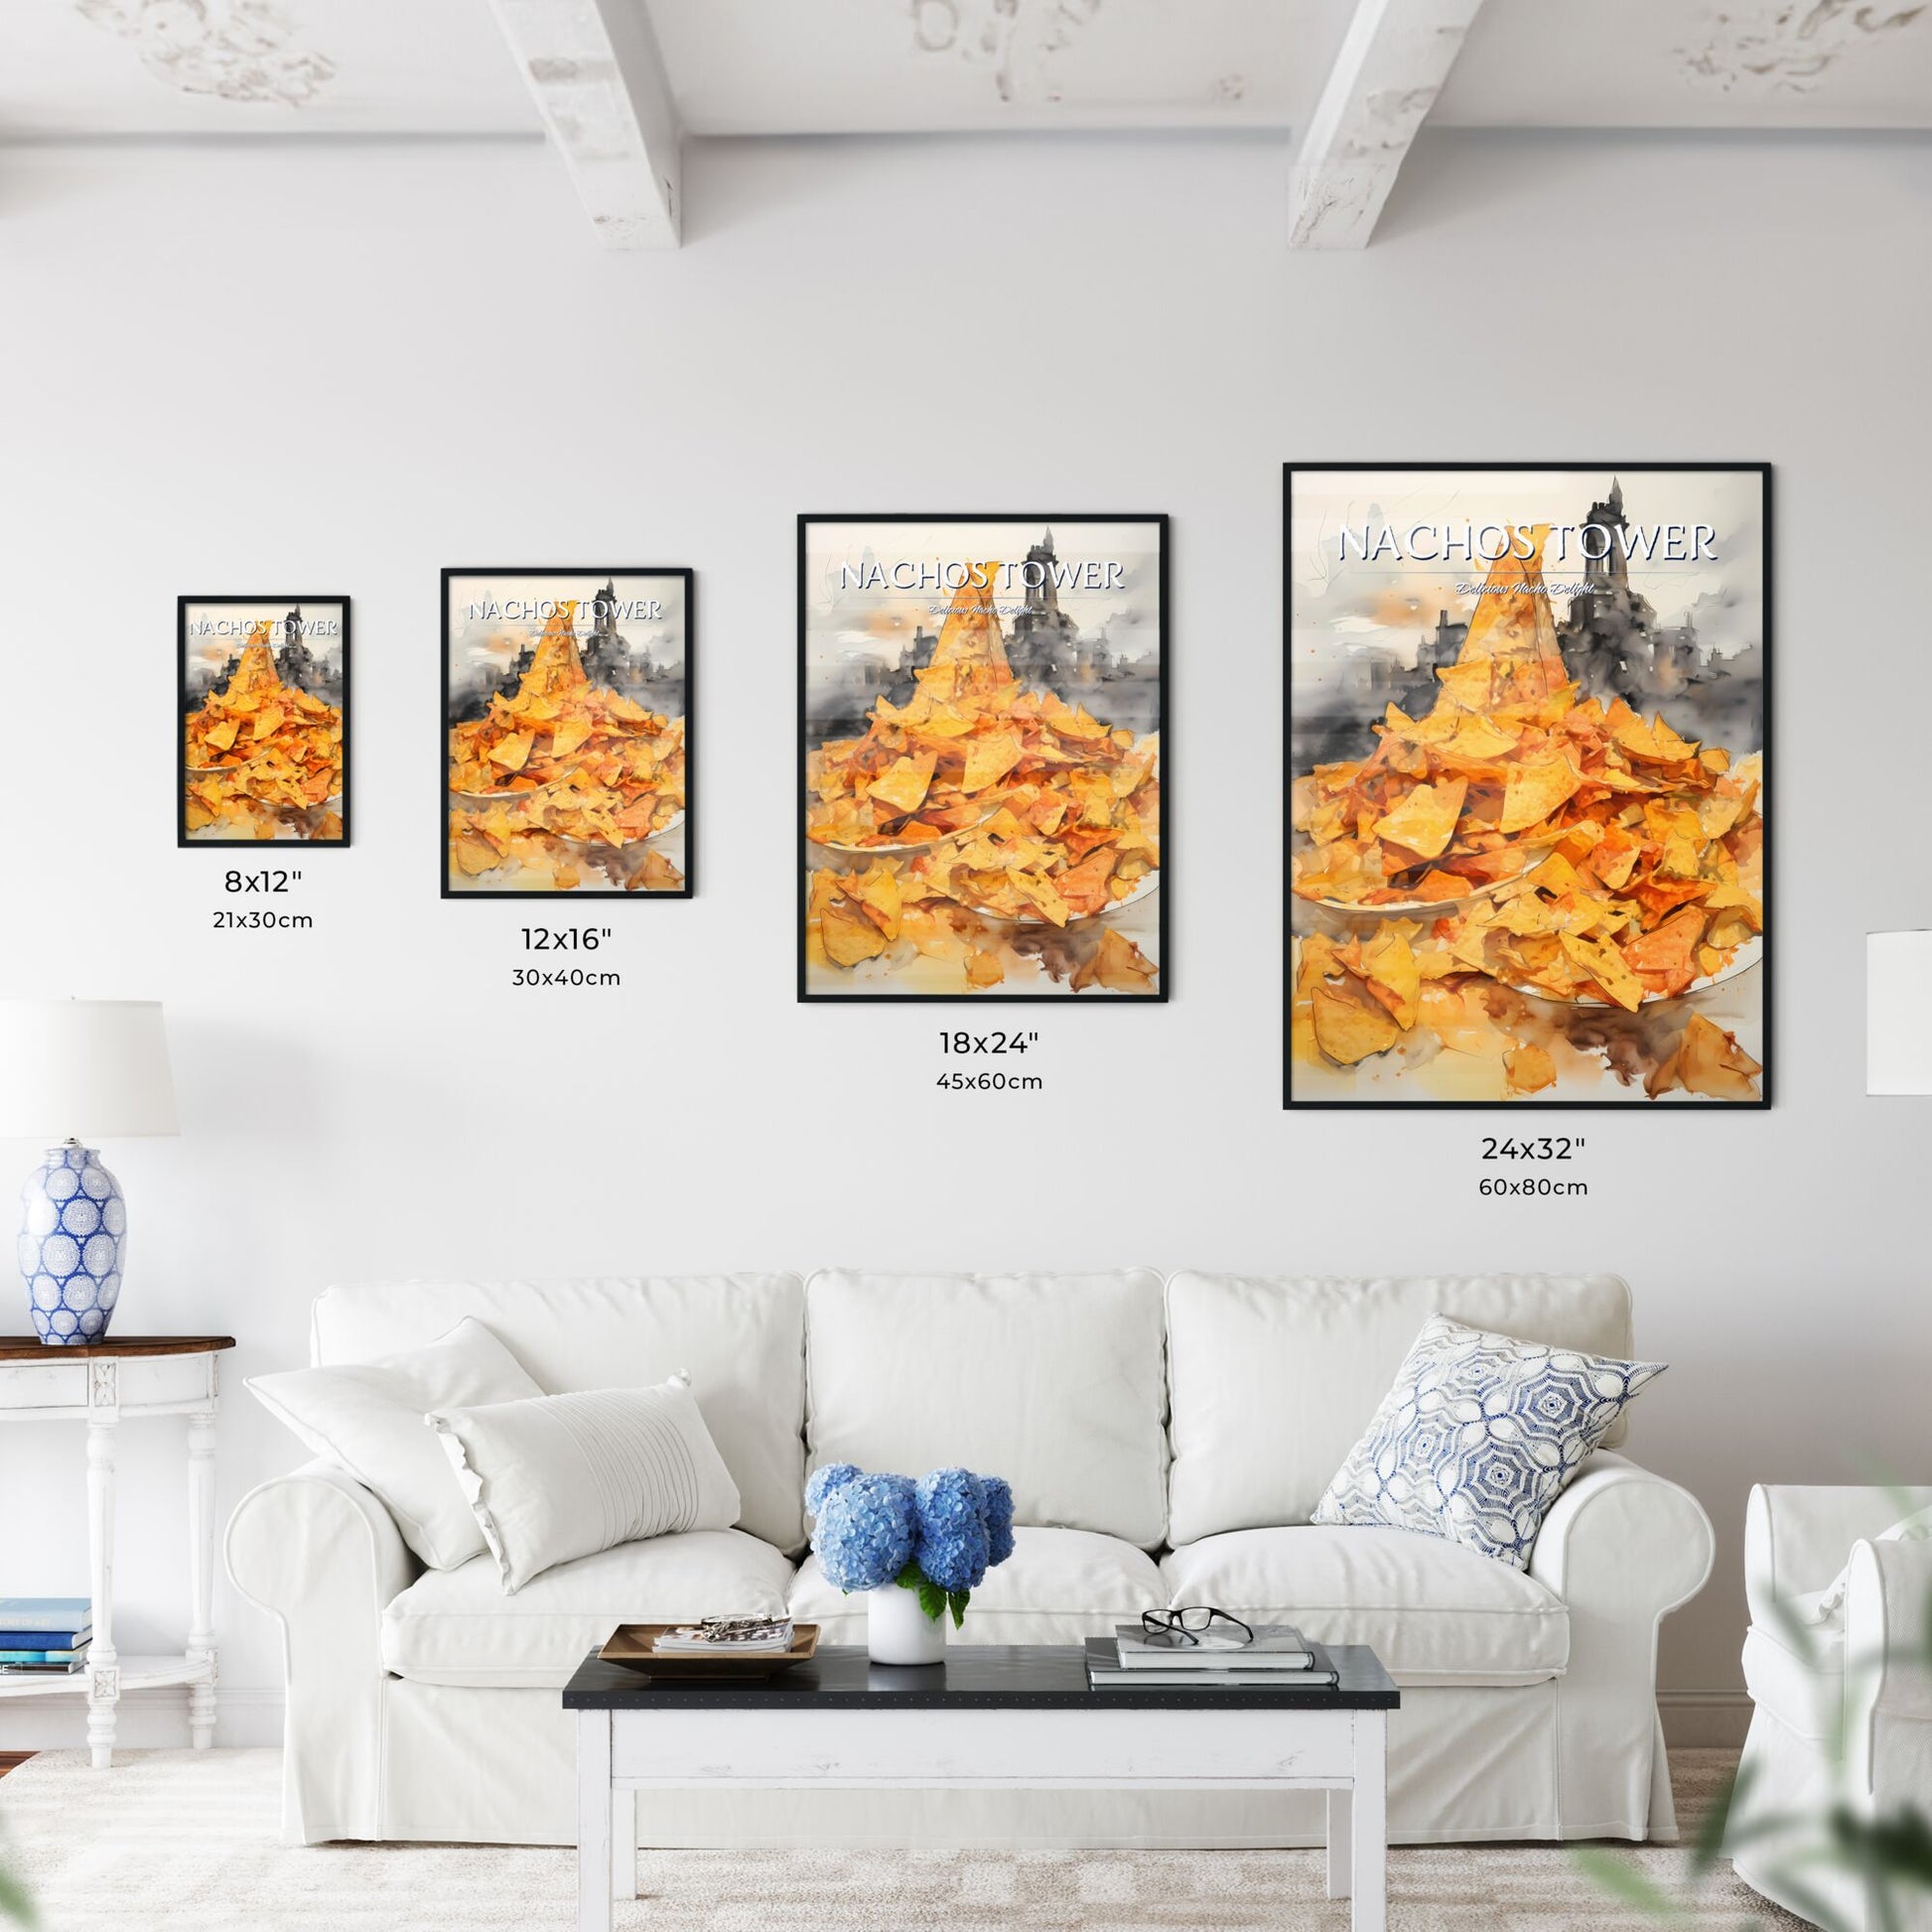 A Poster of Nachos - A Plate Of Chips With A Tower In The Background Default Title